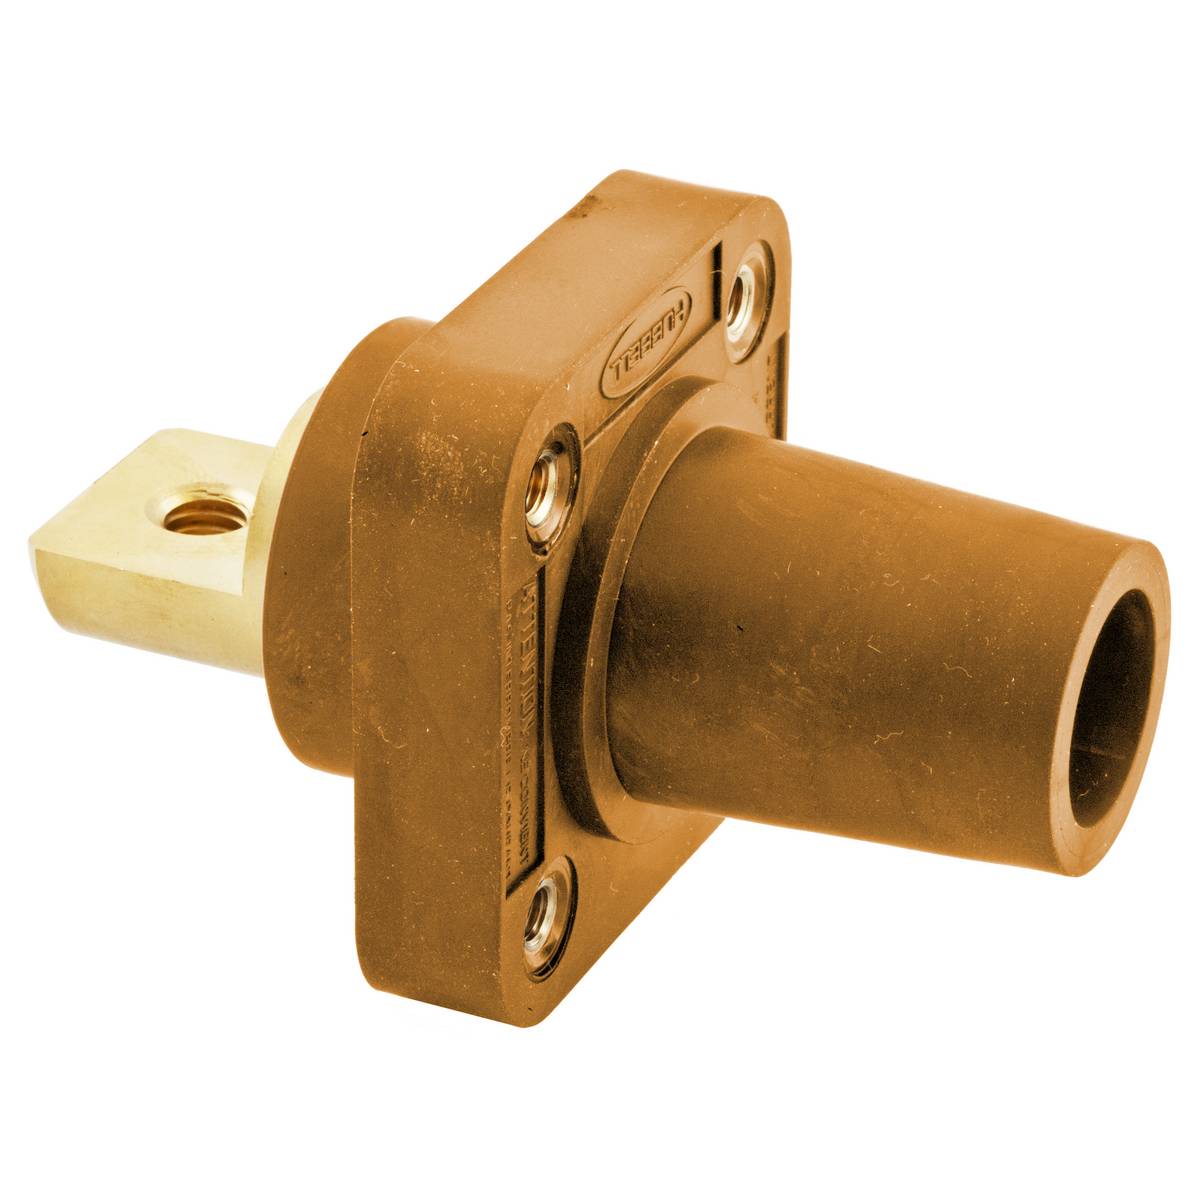 Wiring Device-Kellems HBLFRBO 16 Series 1-Pole Female Heavy Duty Industrial Grade Standard Straight Single Pole Receptacle With 300/400 A Plug, 600 VAC/250 VDC, 400 A, 4 to 4/0 AWG Wire, Screw Terminal Connection